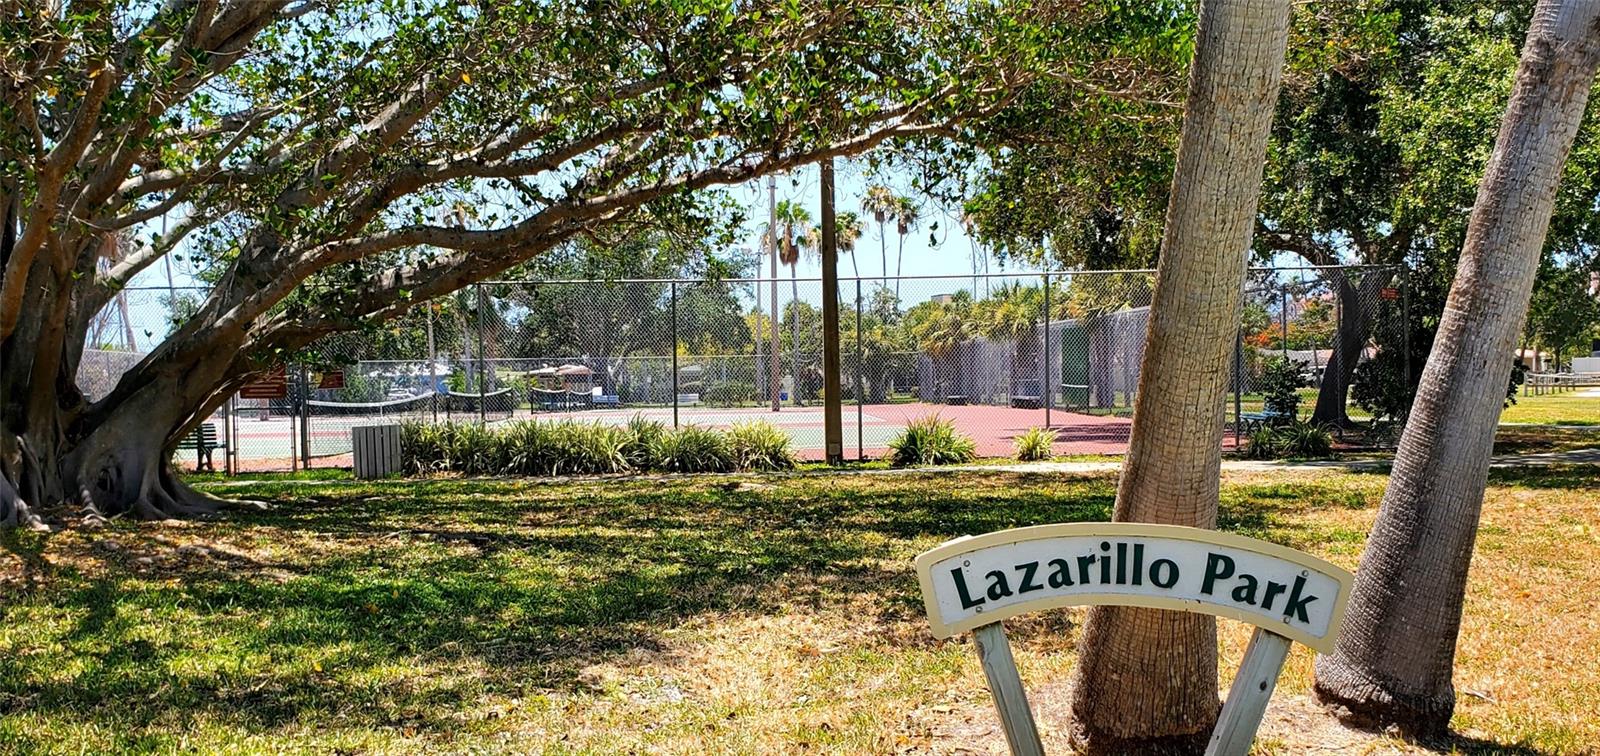 Lazarillo Park, lighted tennis courts, play ground & picnic pagodas